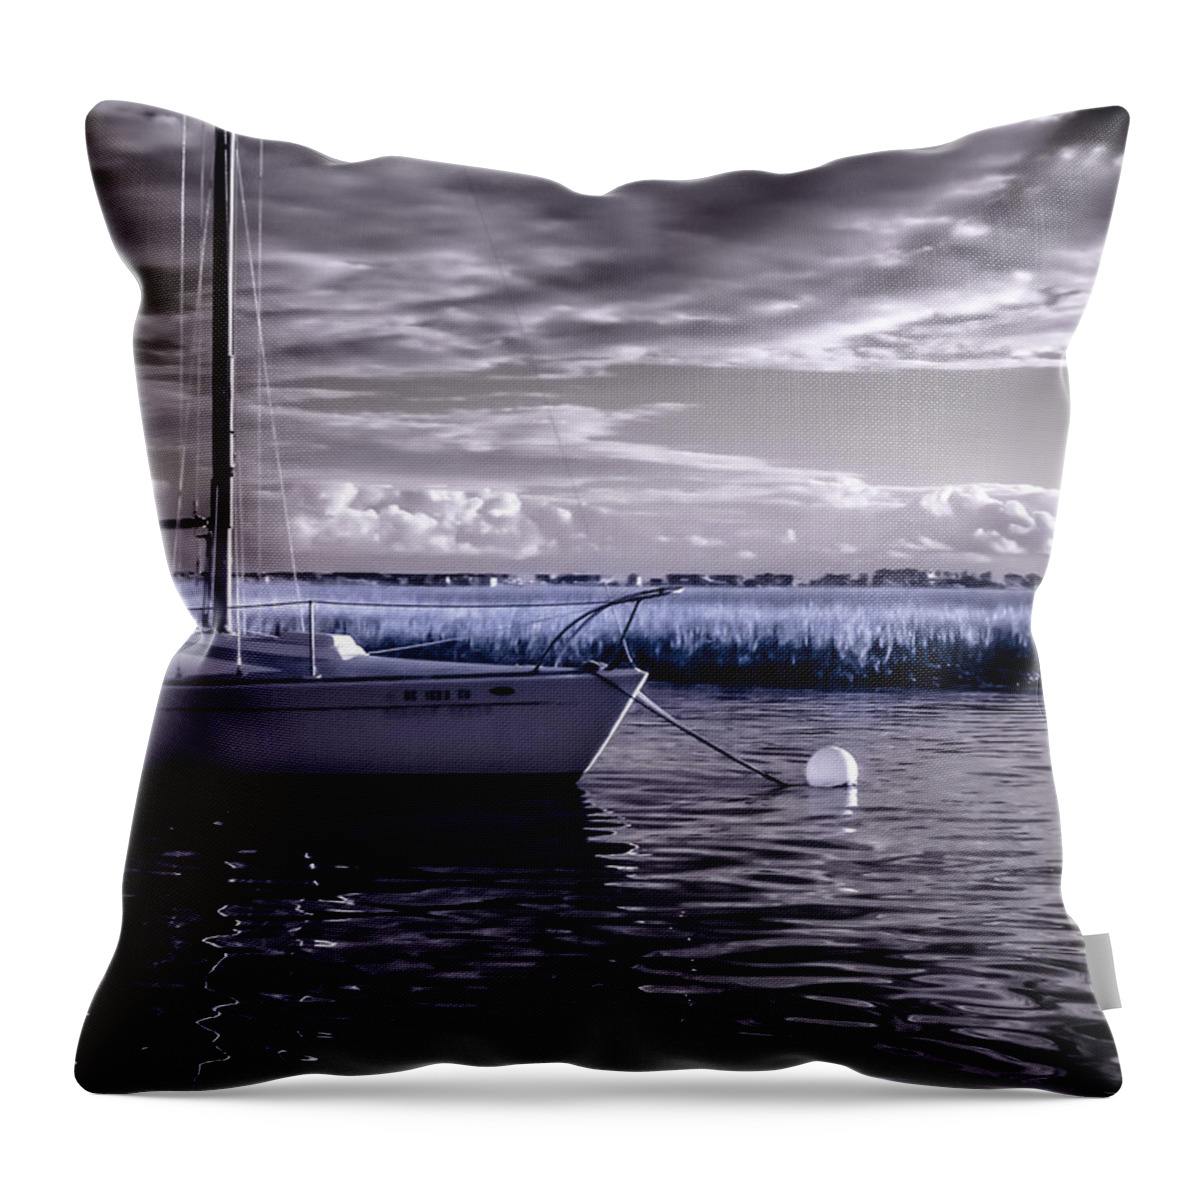 Boat Throw Pillow featuring the photograph Sailboat 04 by Hayden Hammond